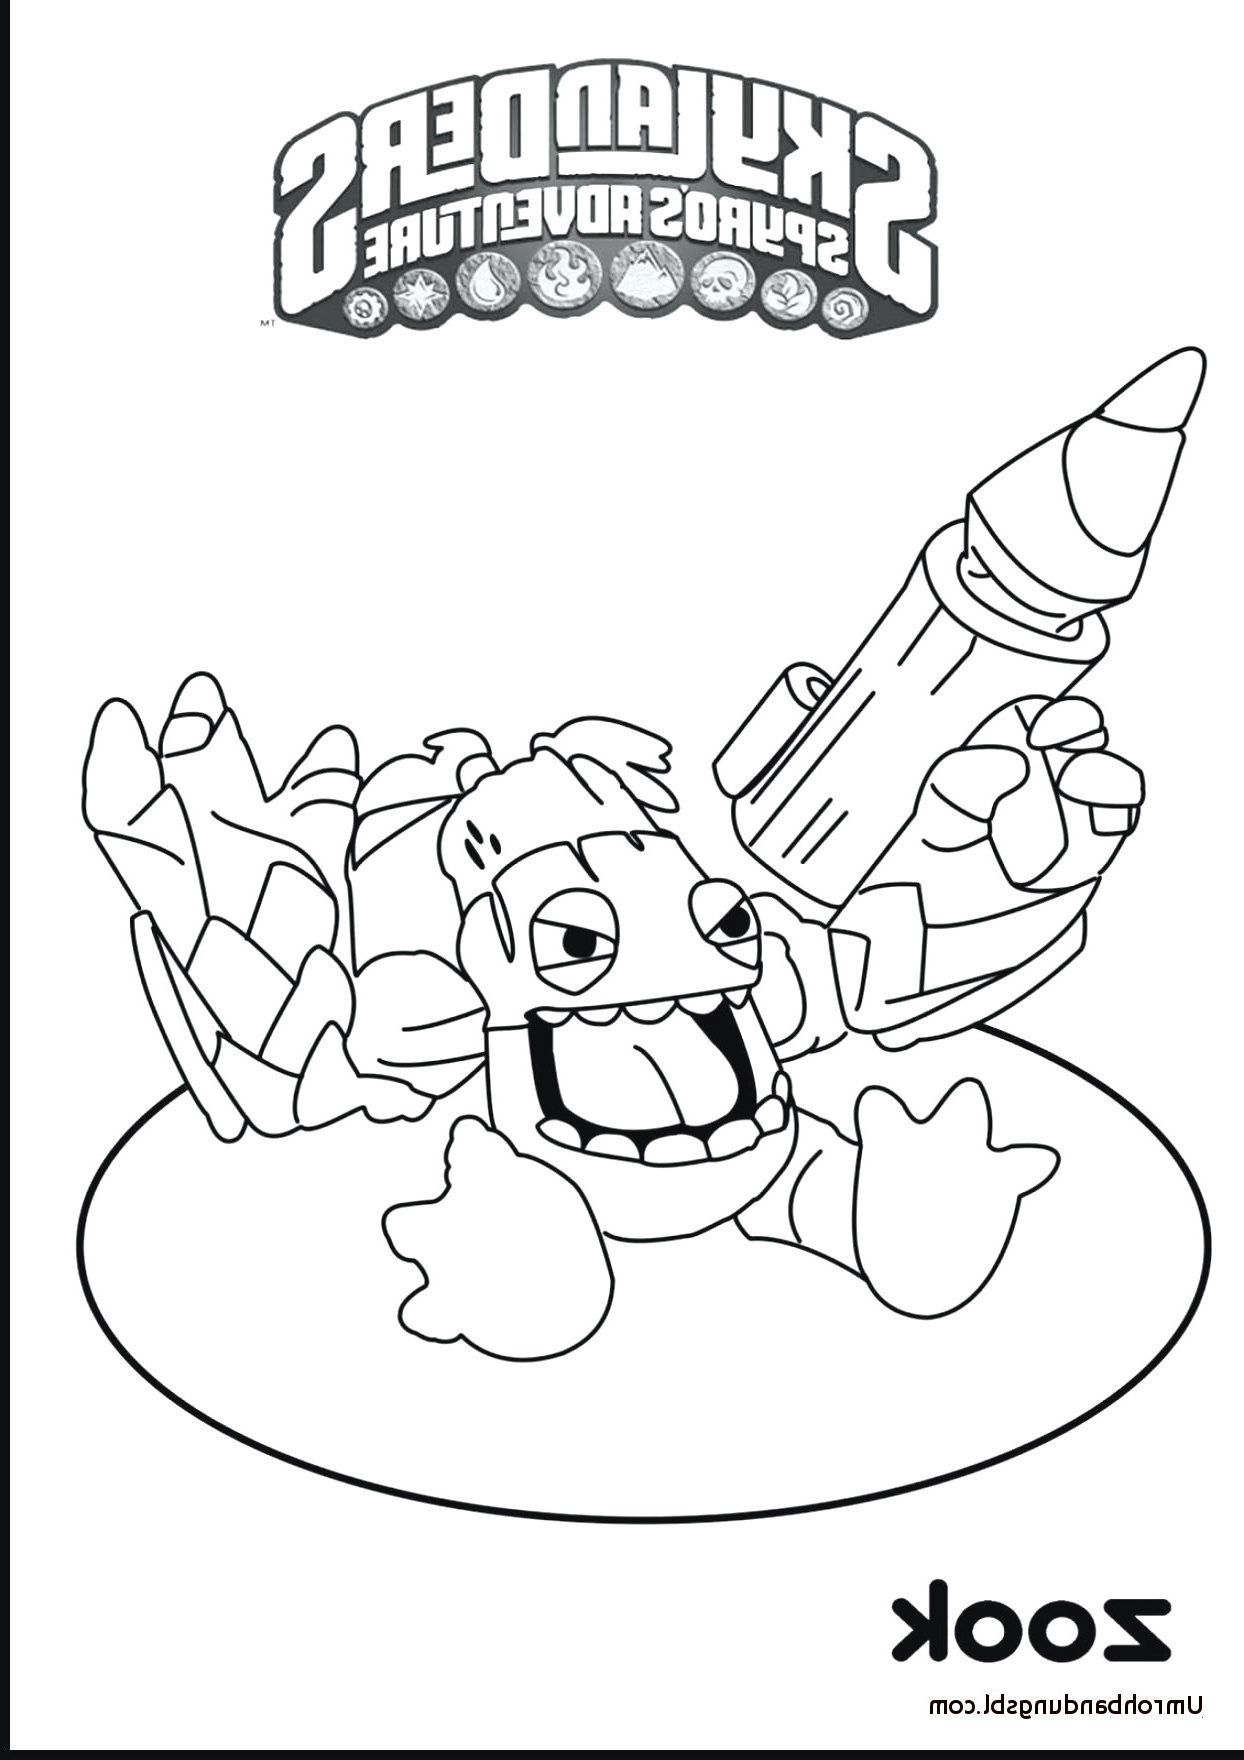 Coloring Pages : Awesome Photos Of Wedding Coloring Crafted Here ...